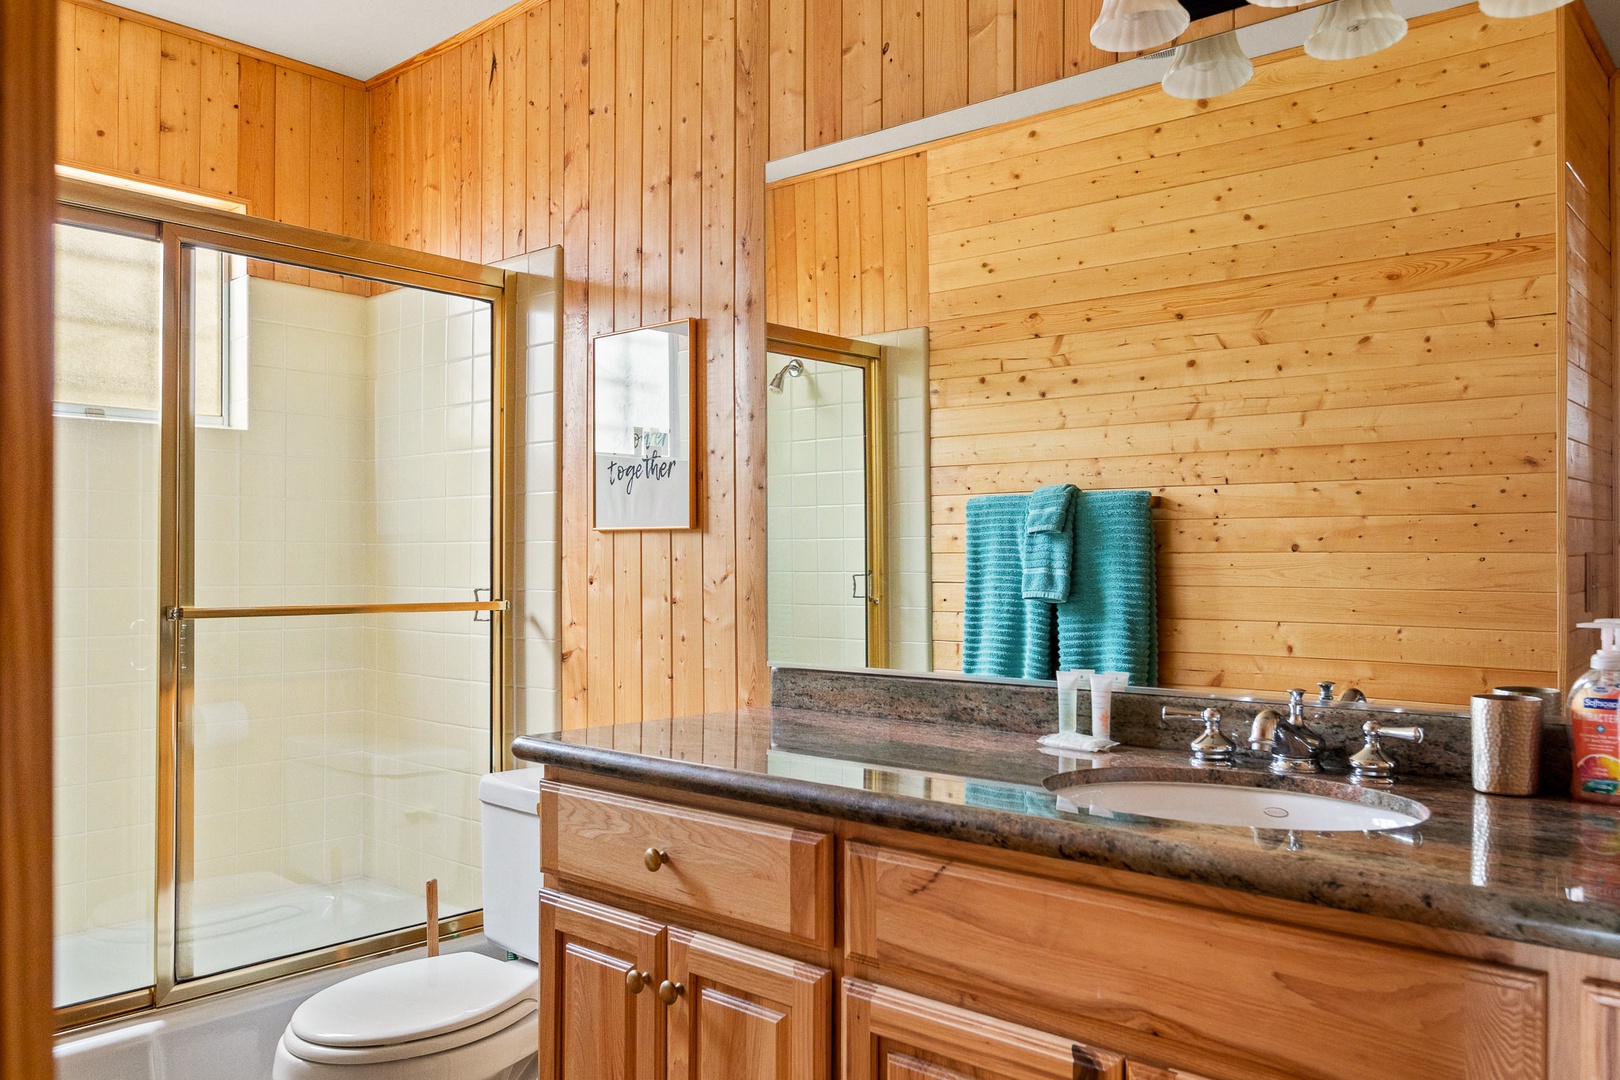 Spacious, light-filled bathroom offering ample counter space and Shower/Tub Combo